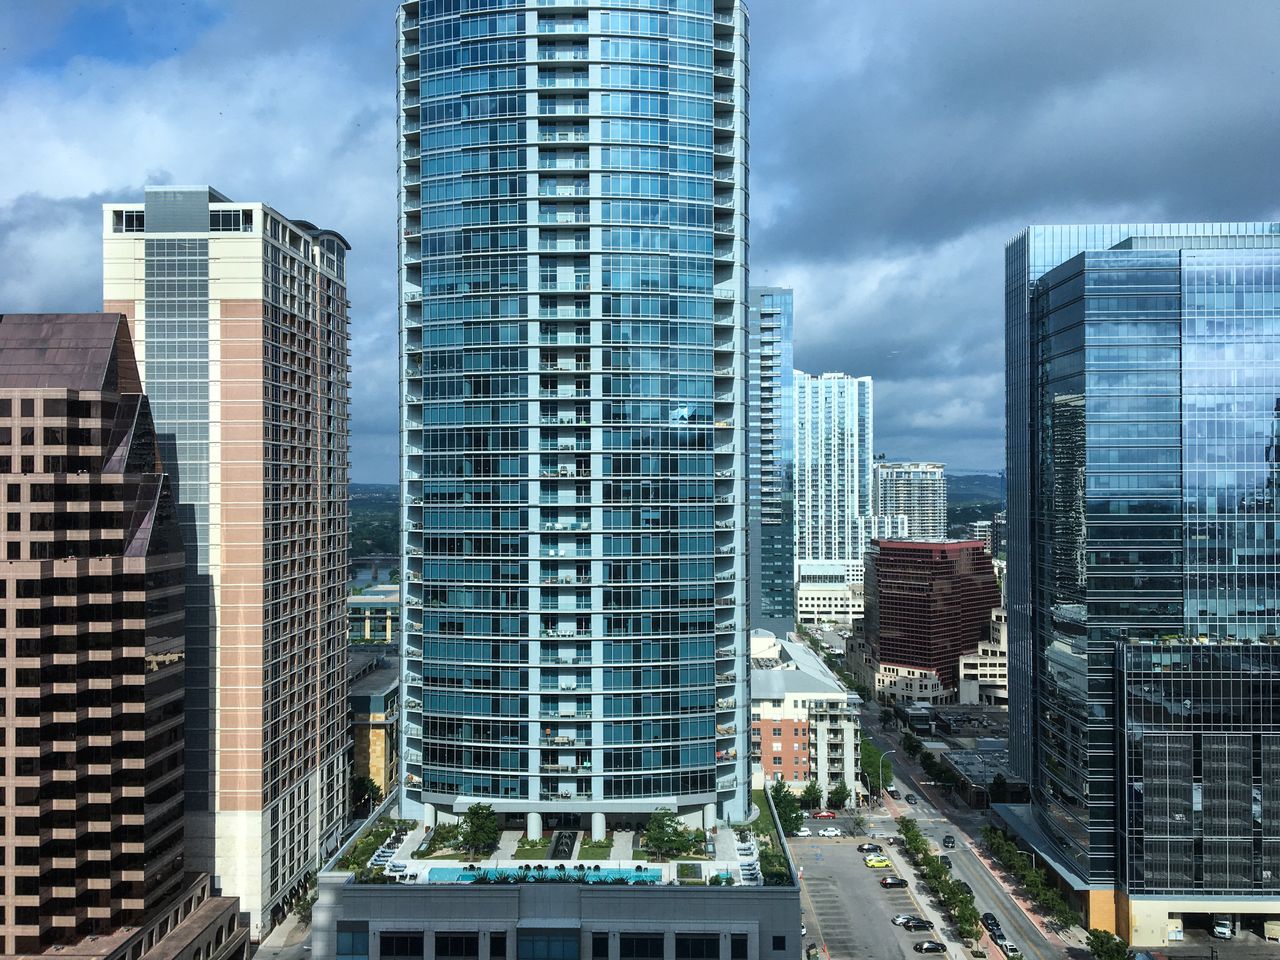 New downtown high-rise condominiums and office spaces recently built in Austin, Texas, which is experiencing a boom based on tourism and high-tech businesses.